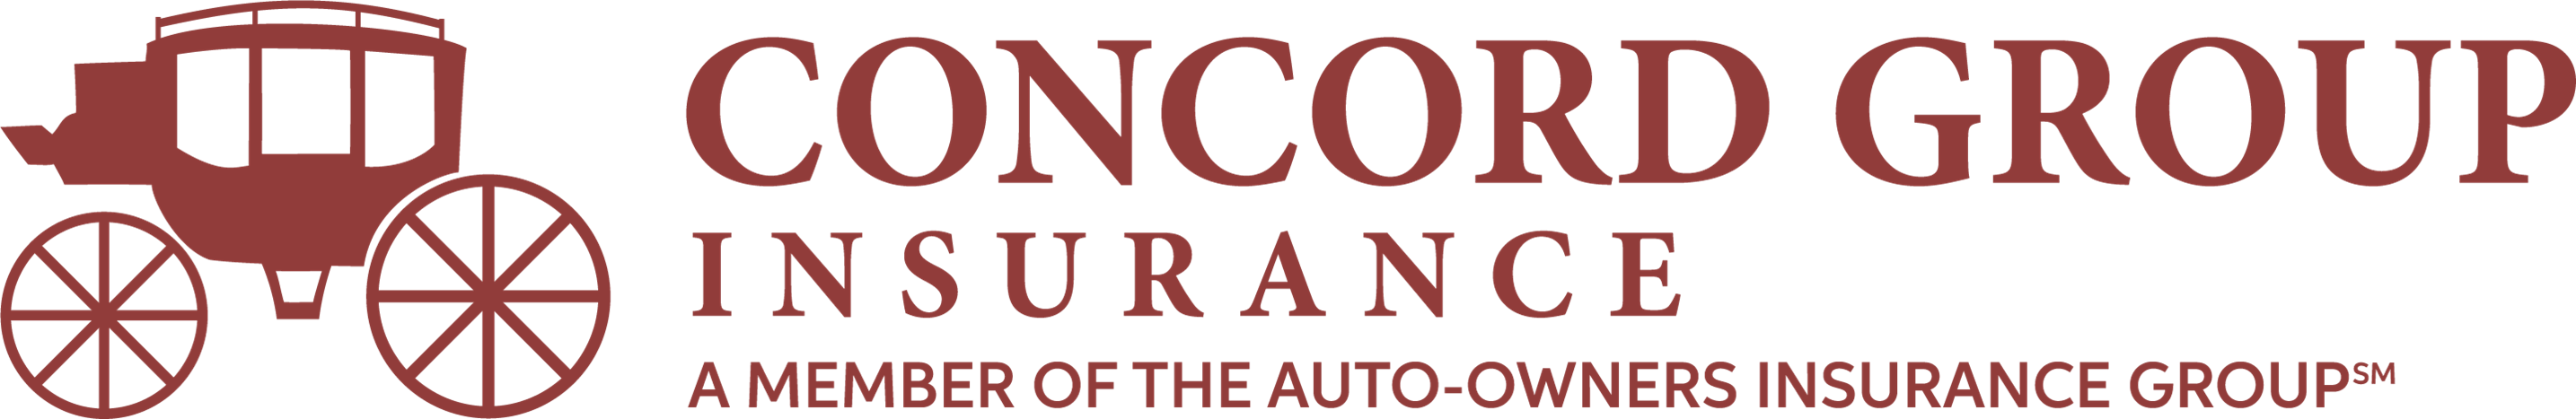 Concord Logo - Concord Group Insurance - Concord Group Insurance